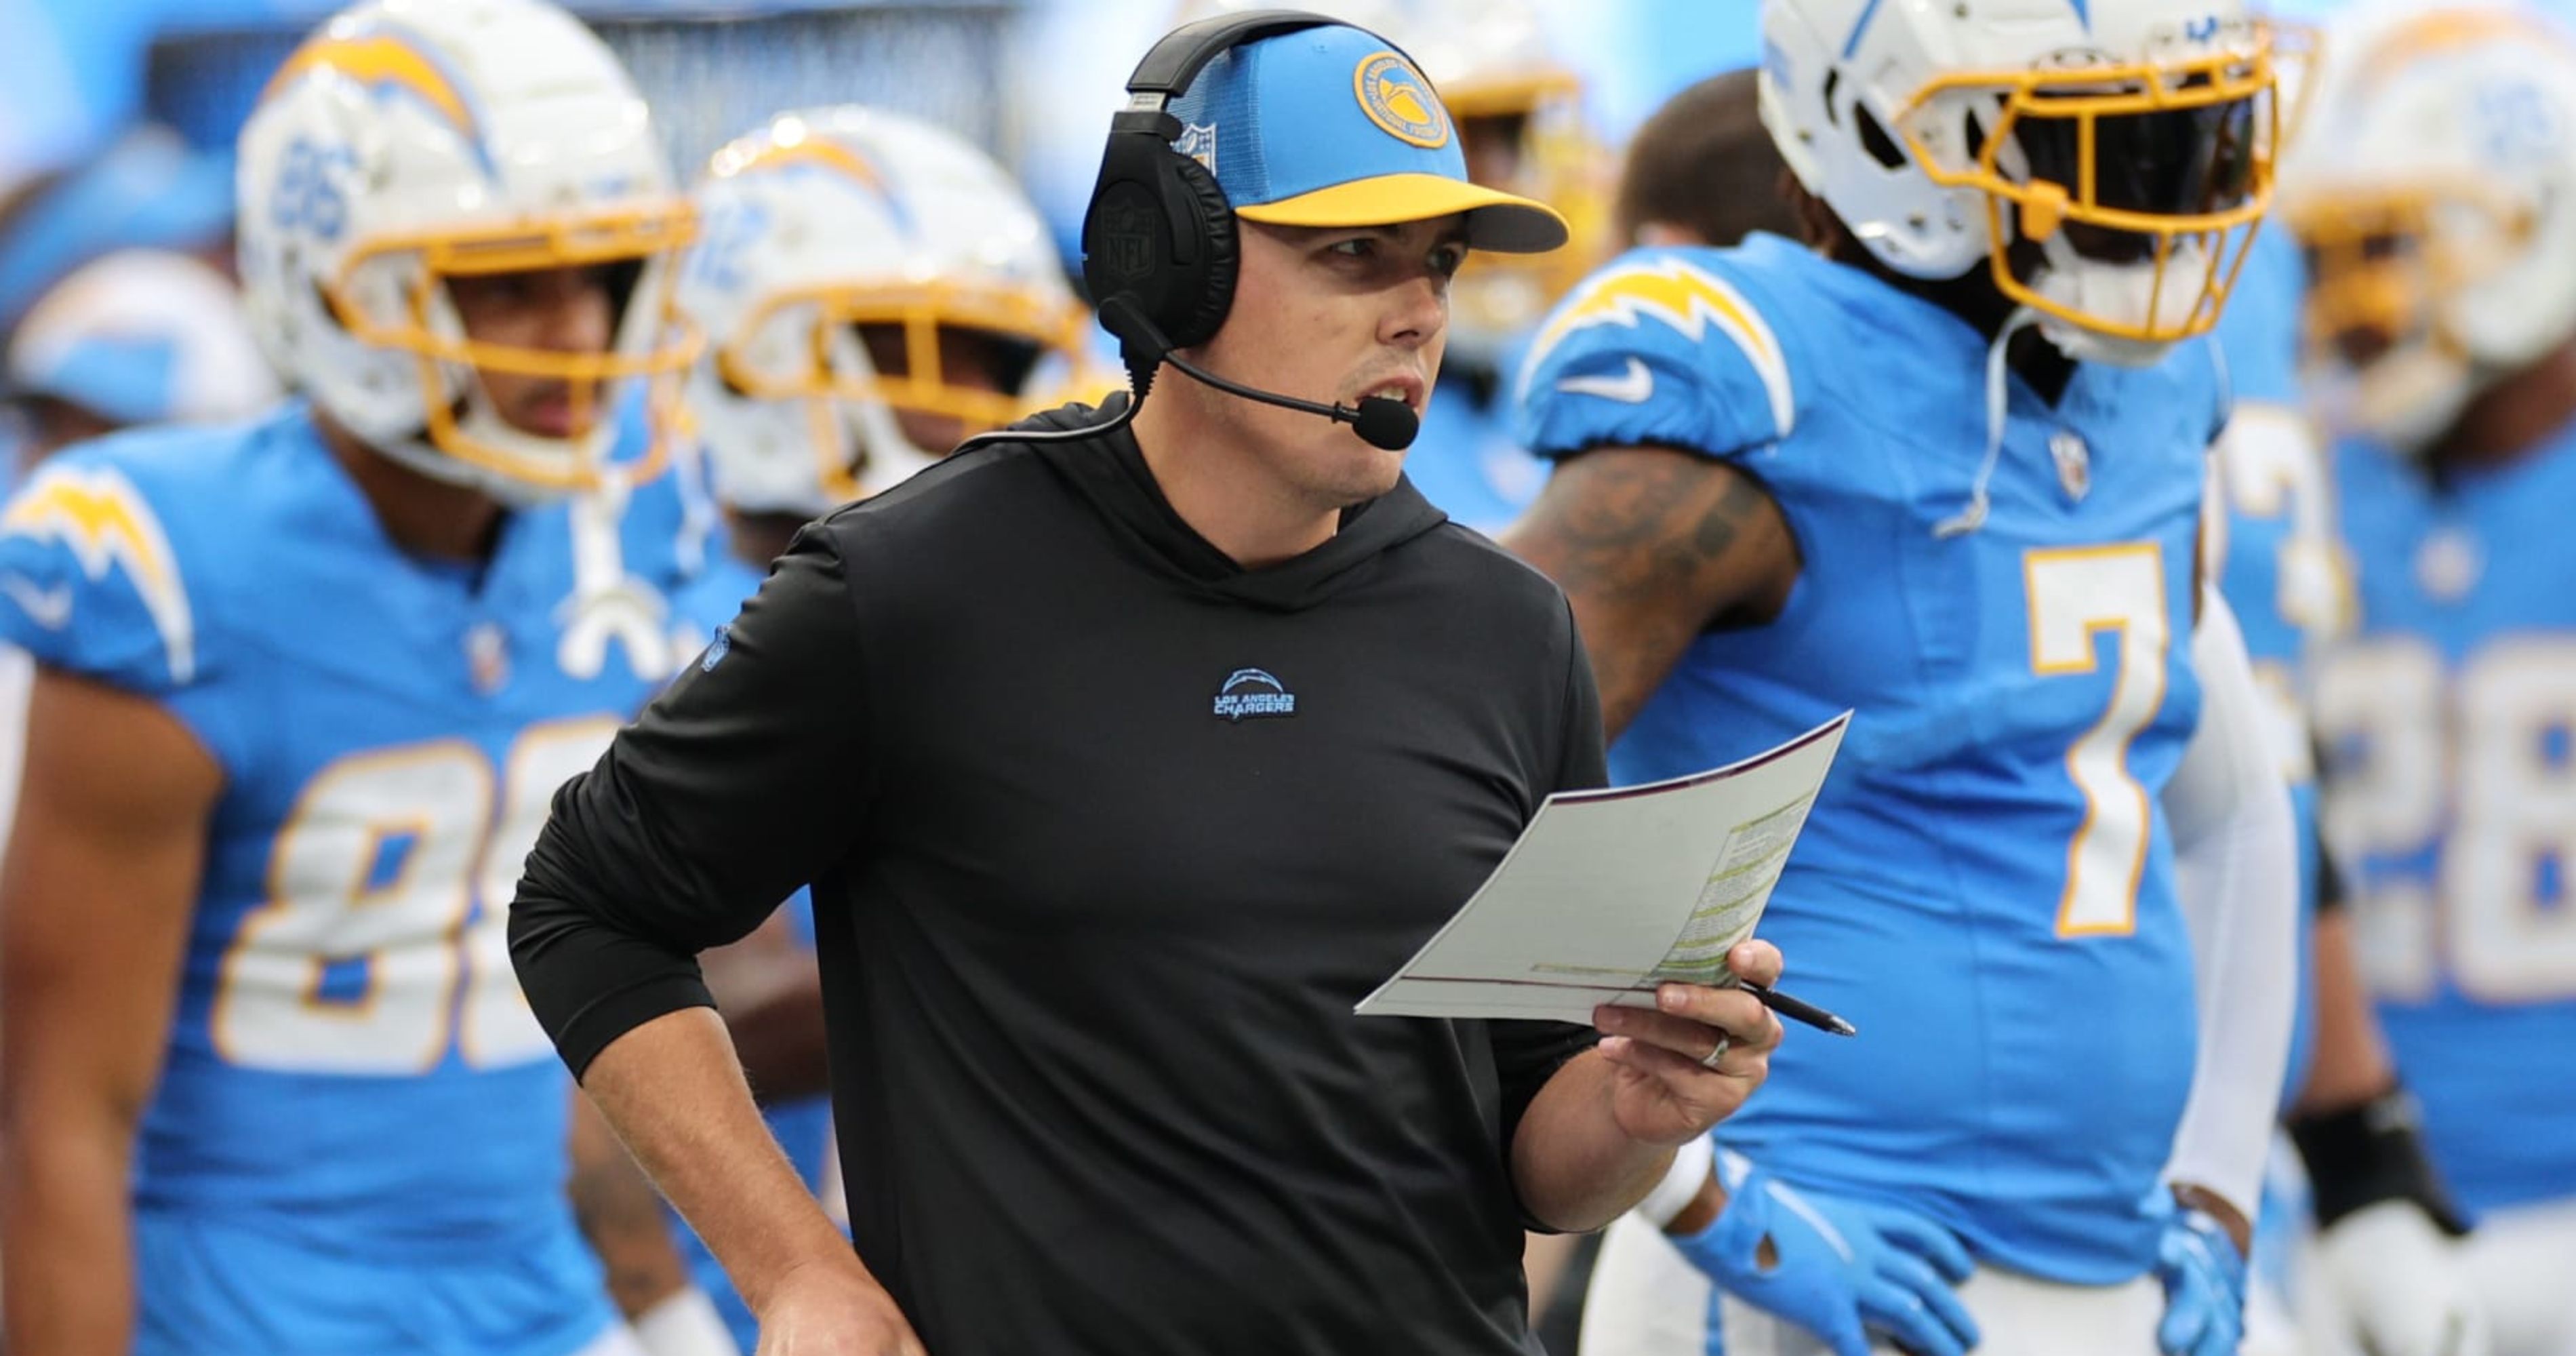 Chargers to wear popular powder blue uniform for 2019 home games